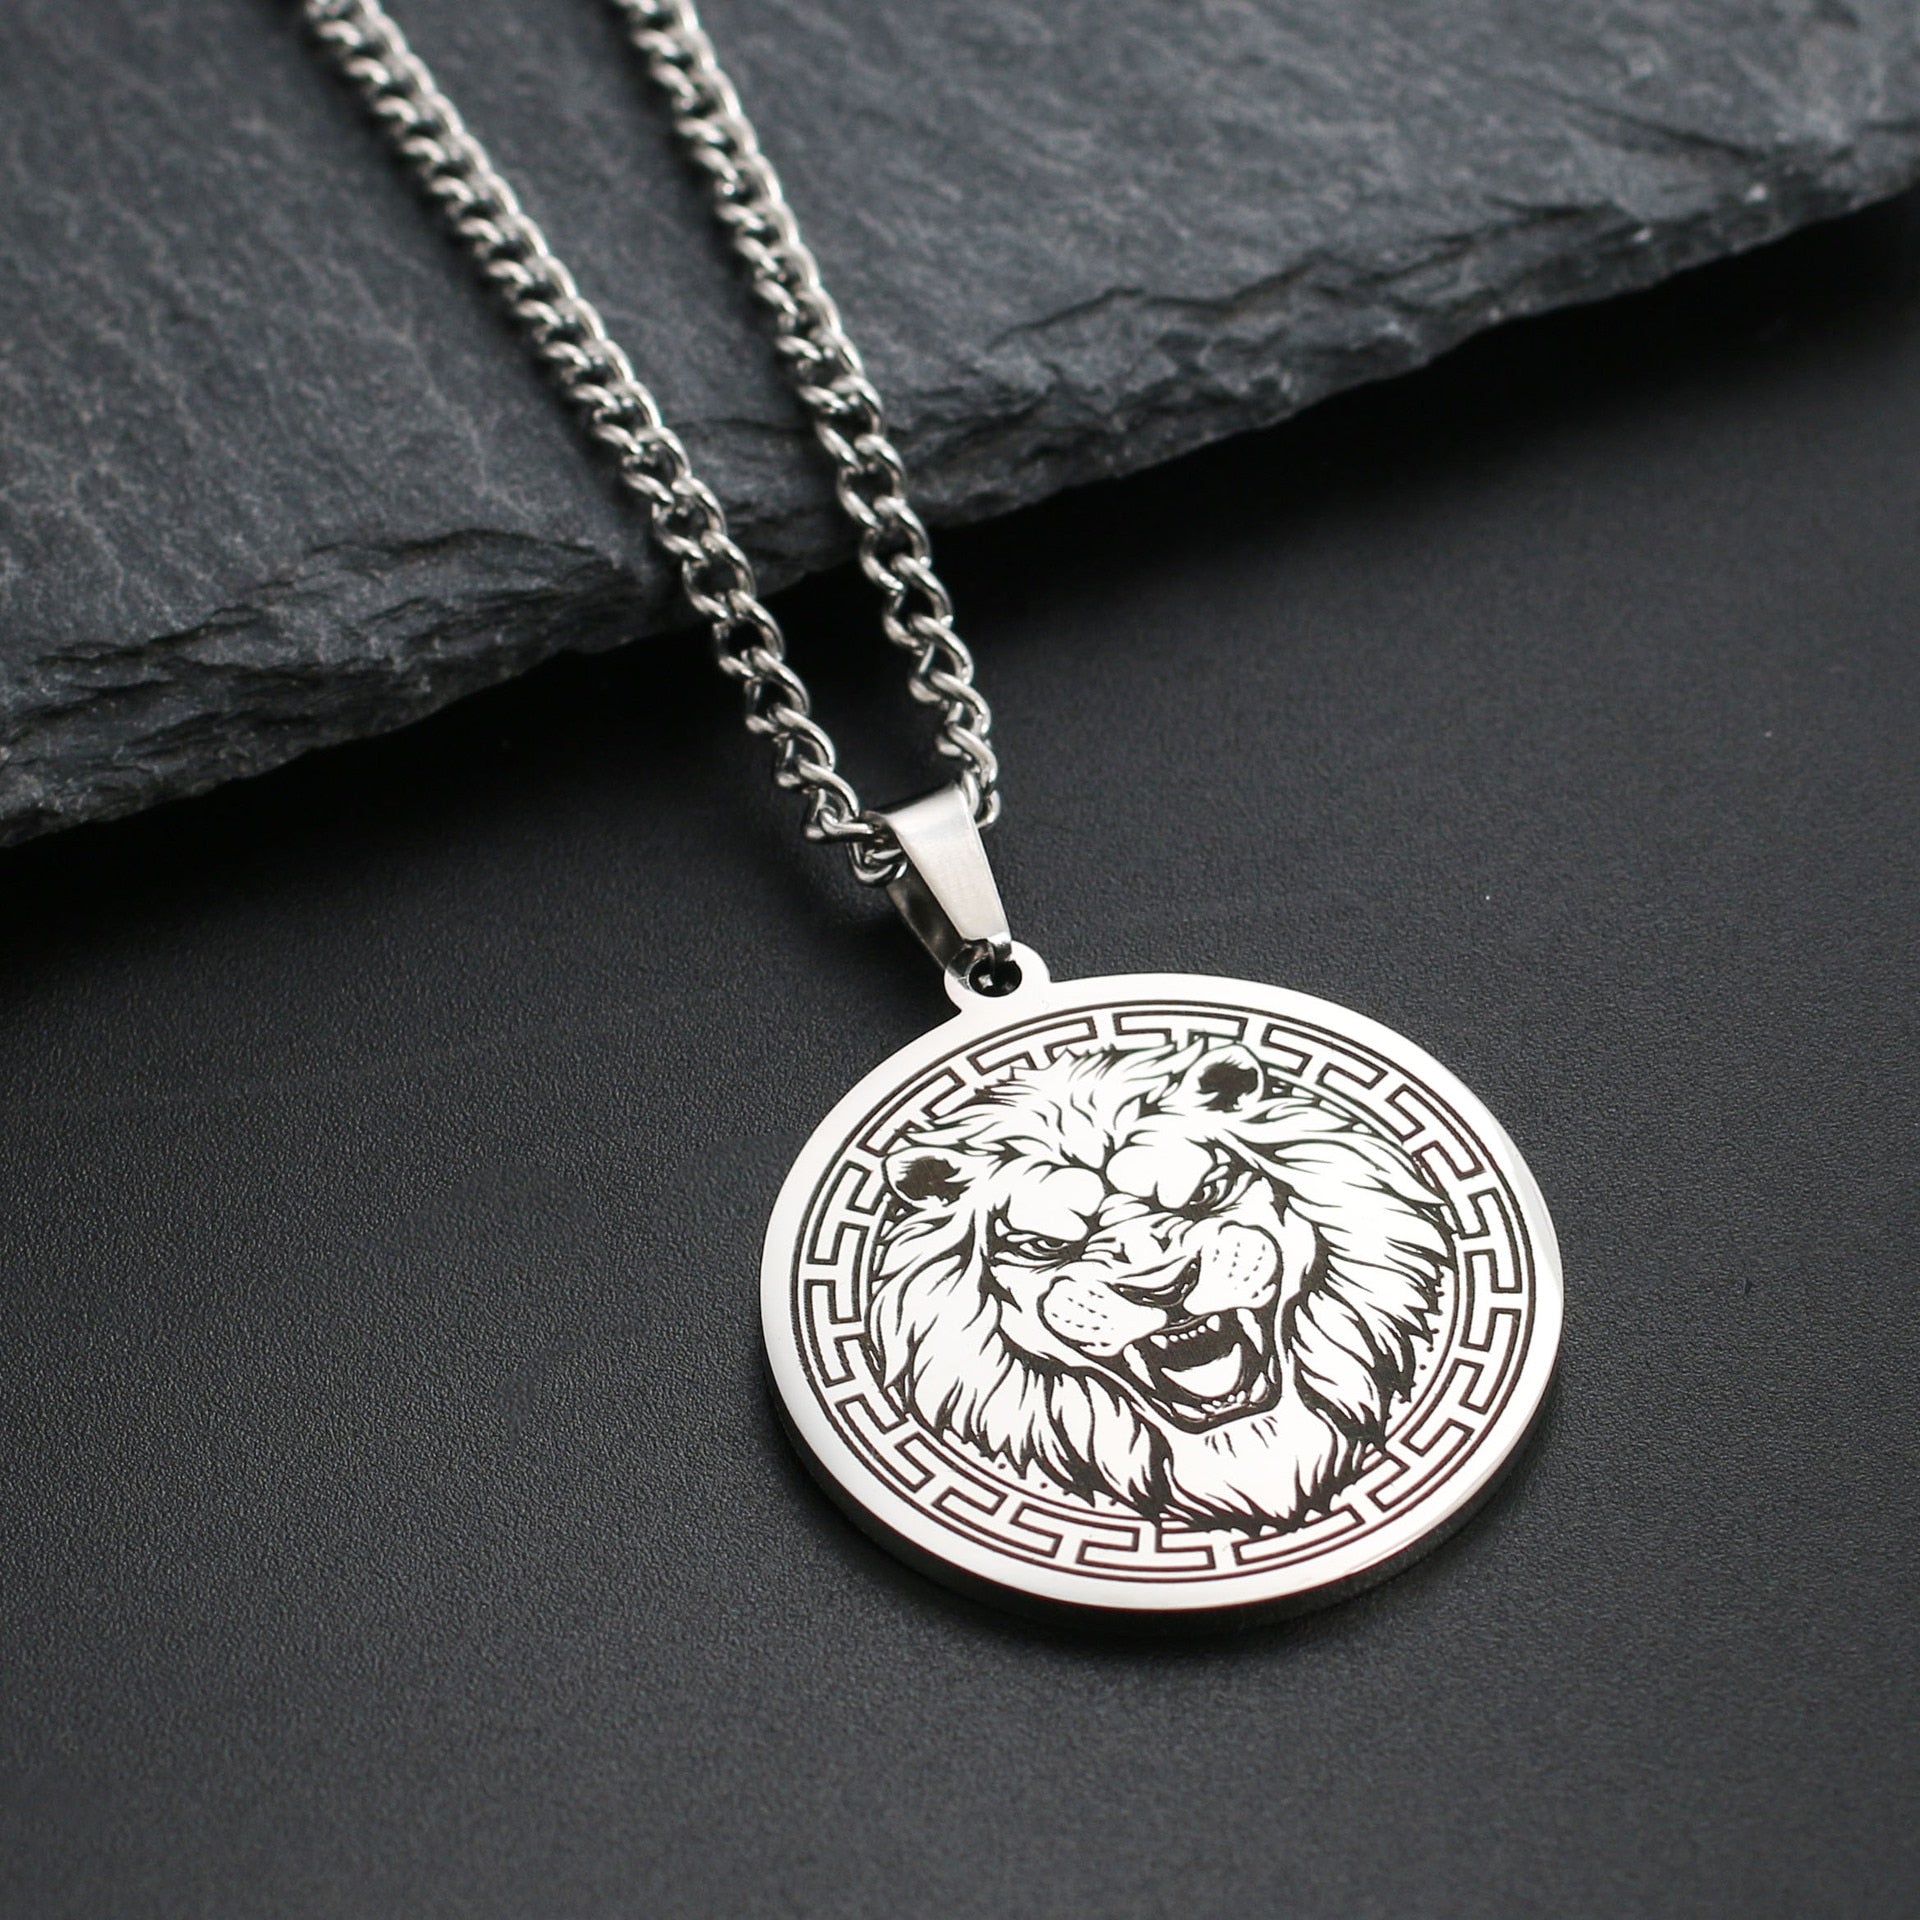 DOOYIO Bear Wolf Tiger Lion Animal Pendant Necklace Stainless Steel Statement Box Chain Male Men Necklaces Jewelry